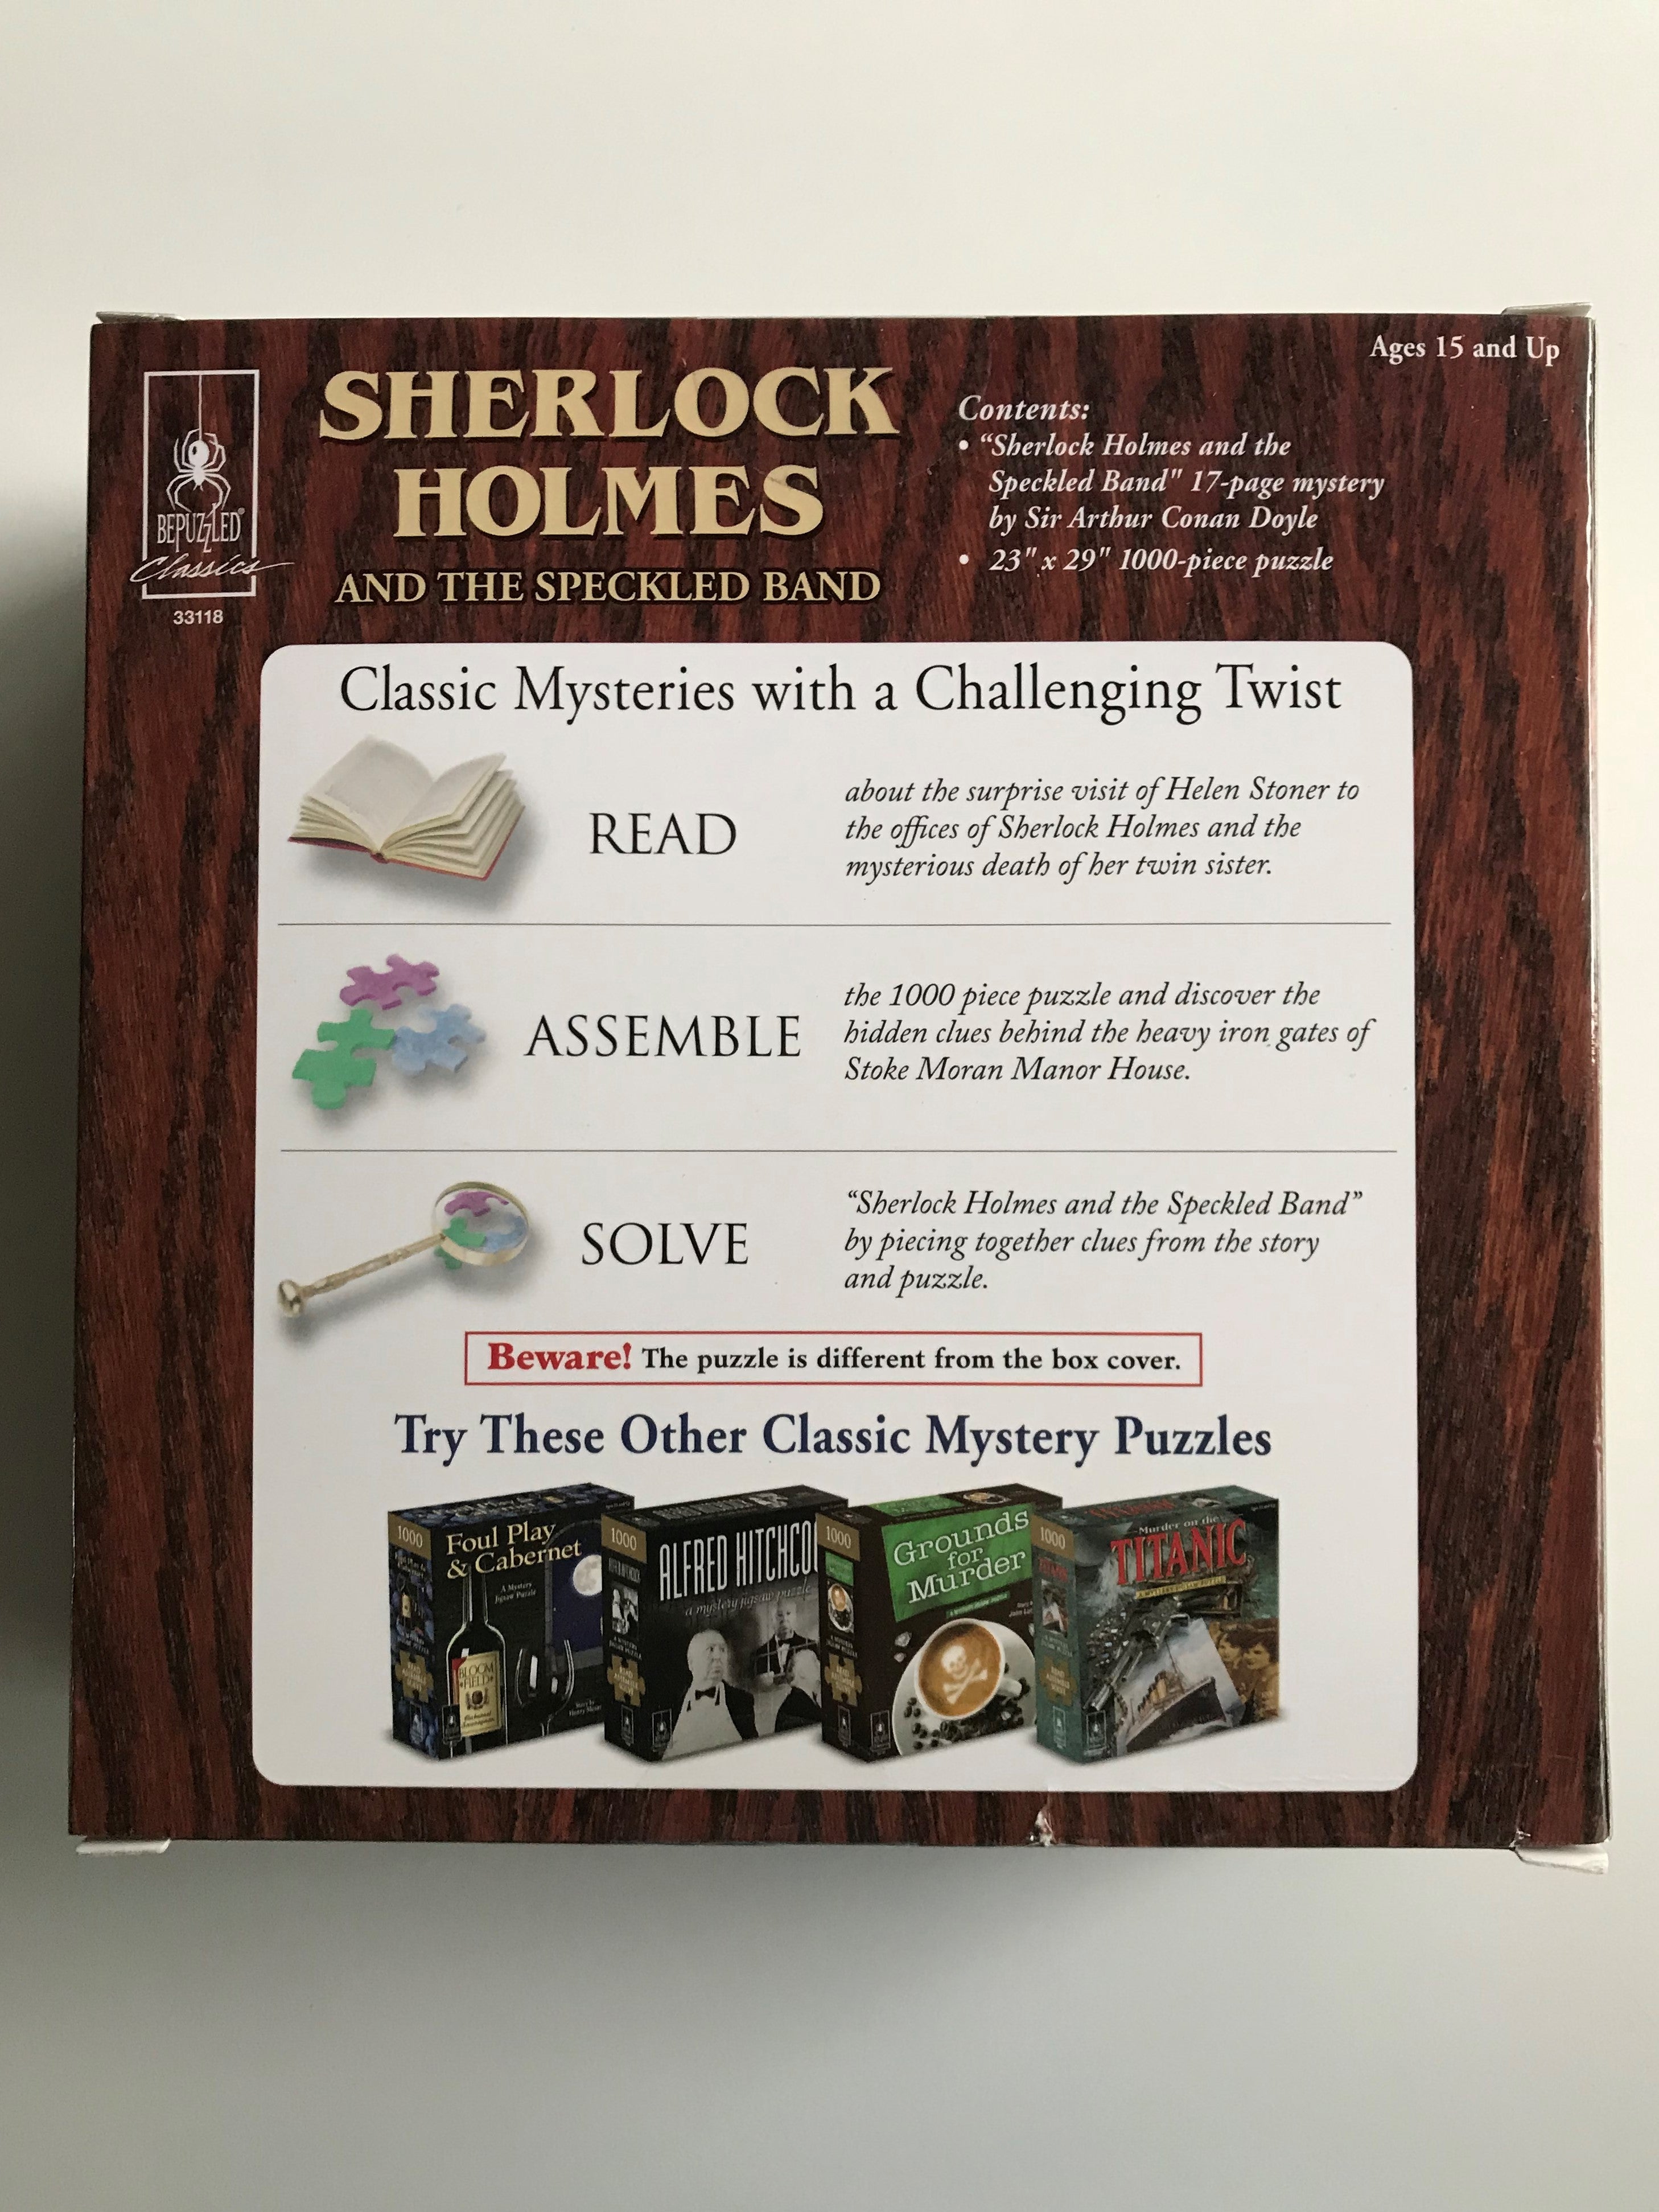 Sherlock Holmes and the Speckled Band Mystery 1000 Piece Puzzle